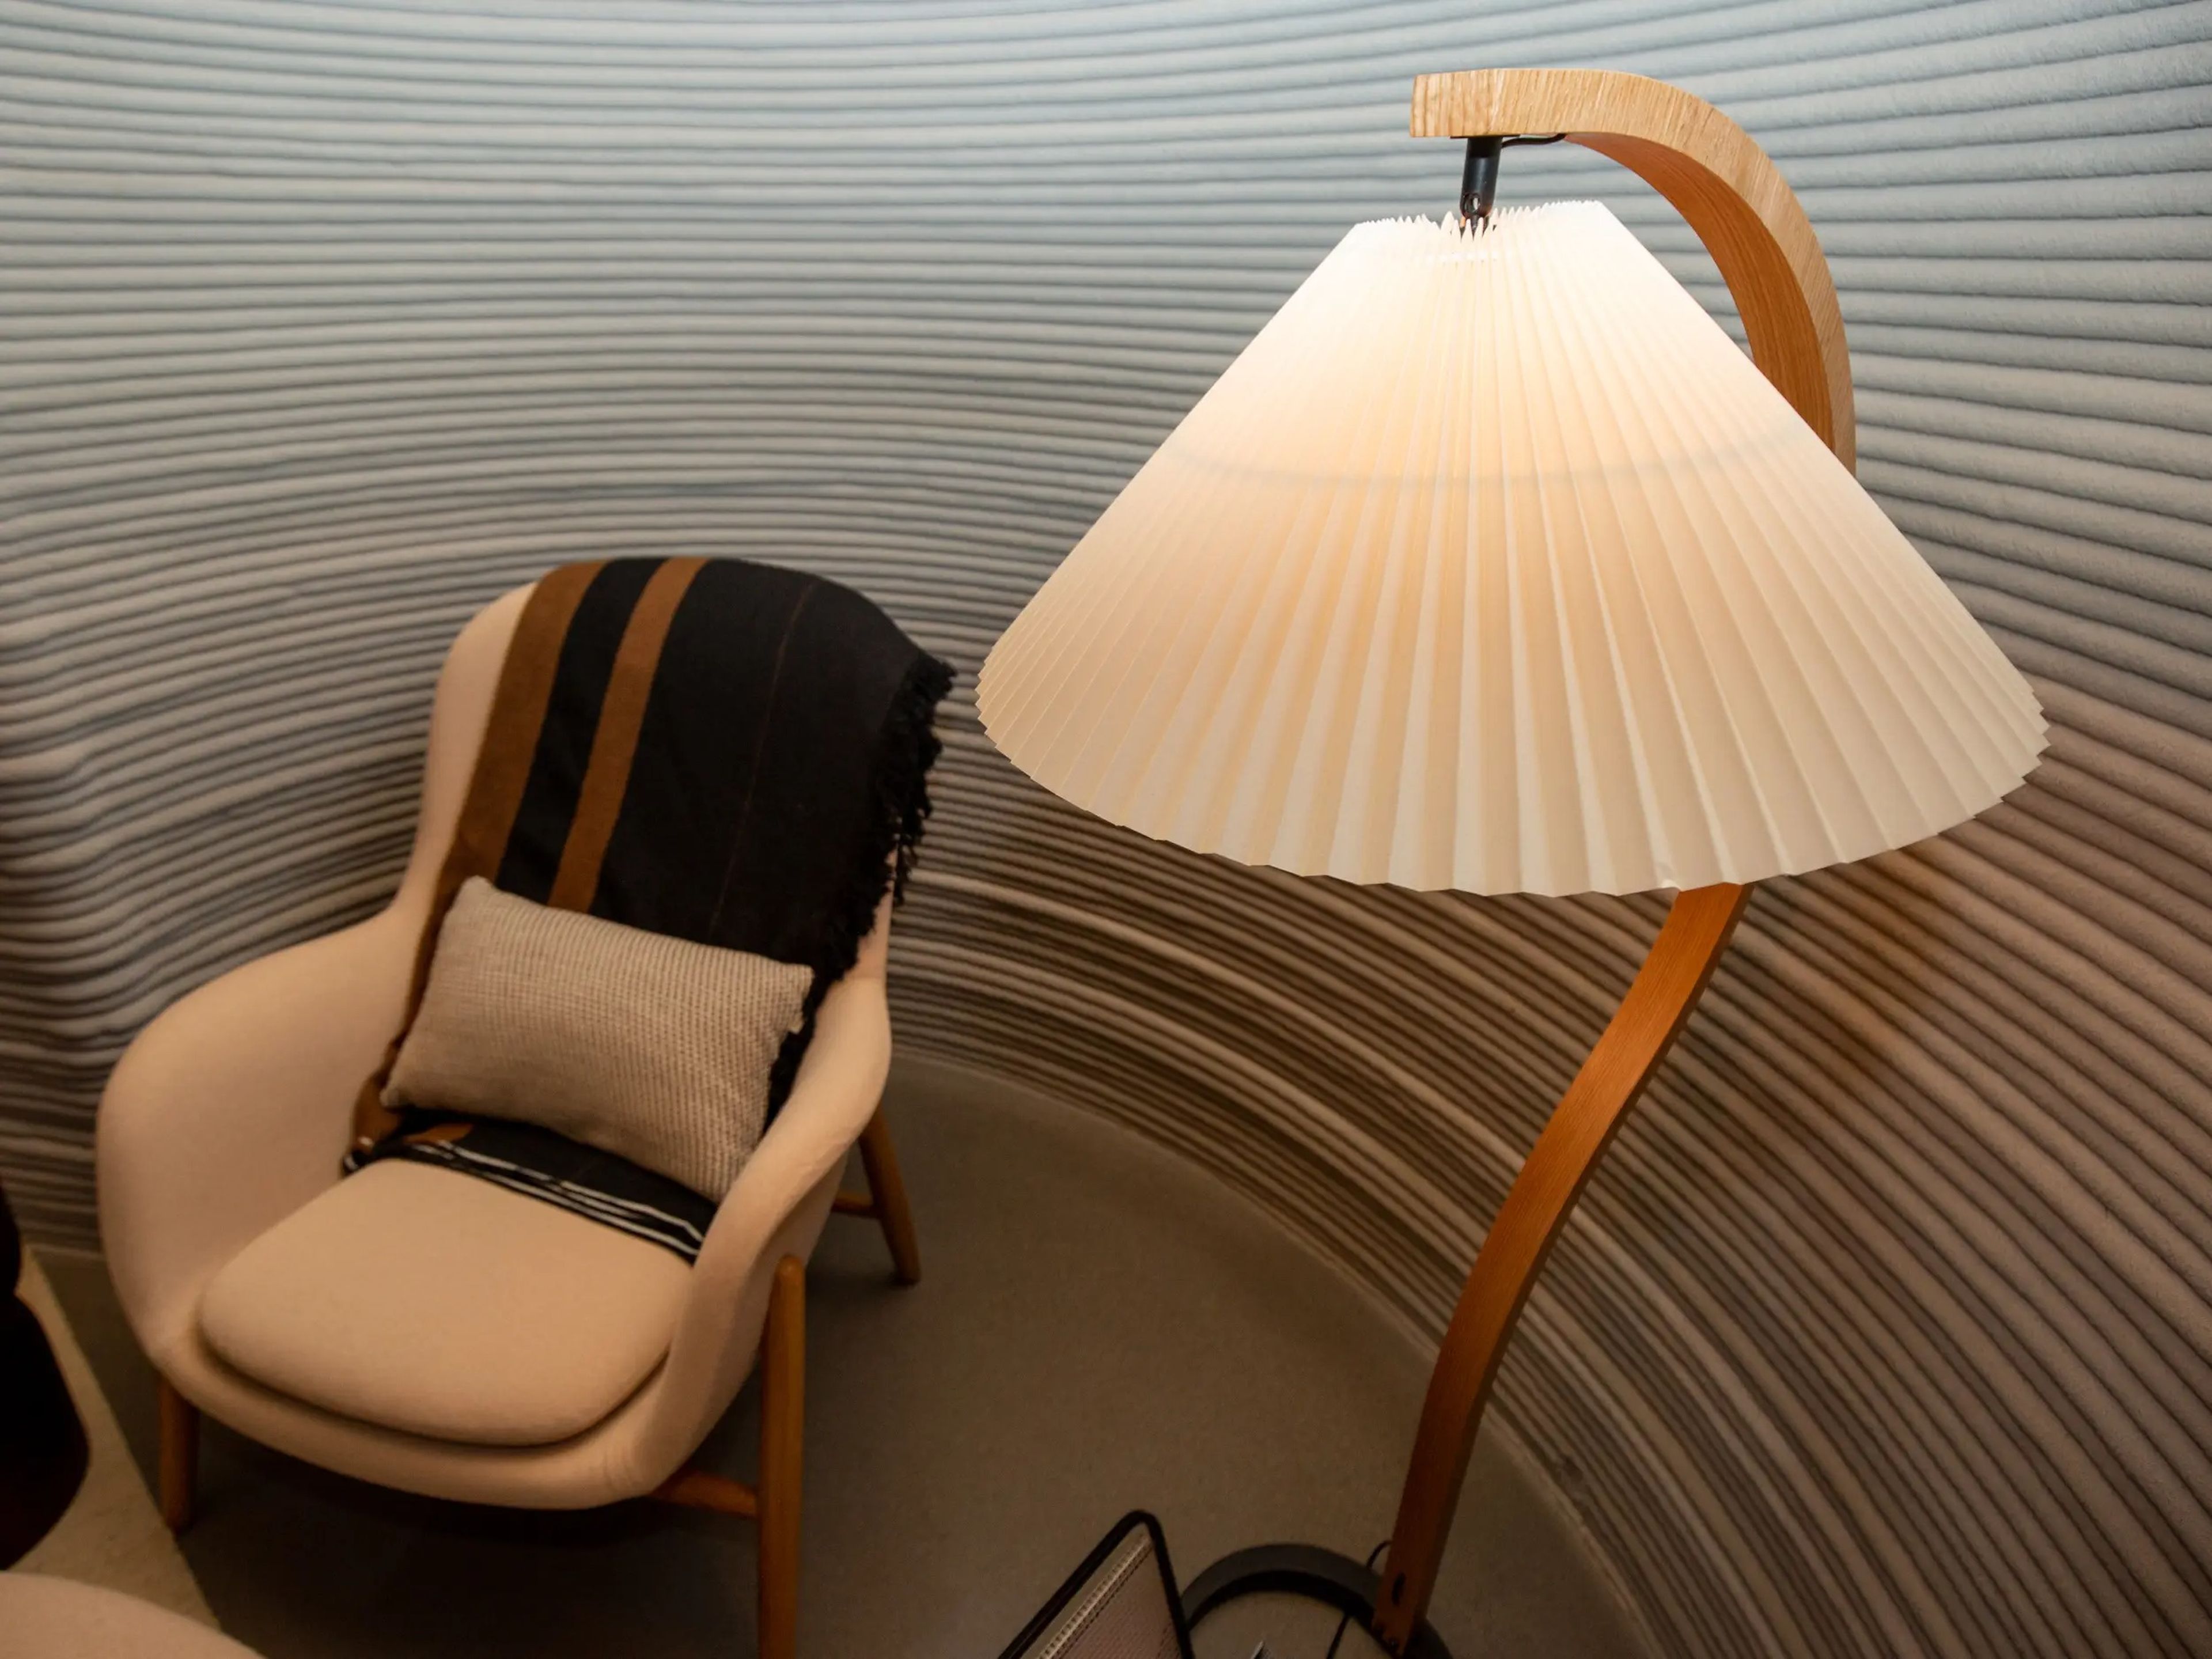 A lounge chair and light fixture in front of a 3D printed wall.